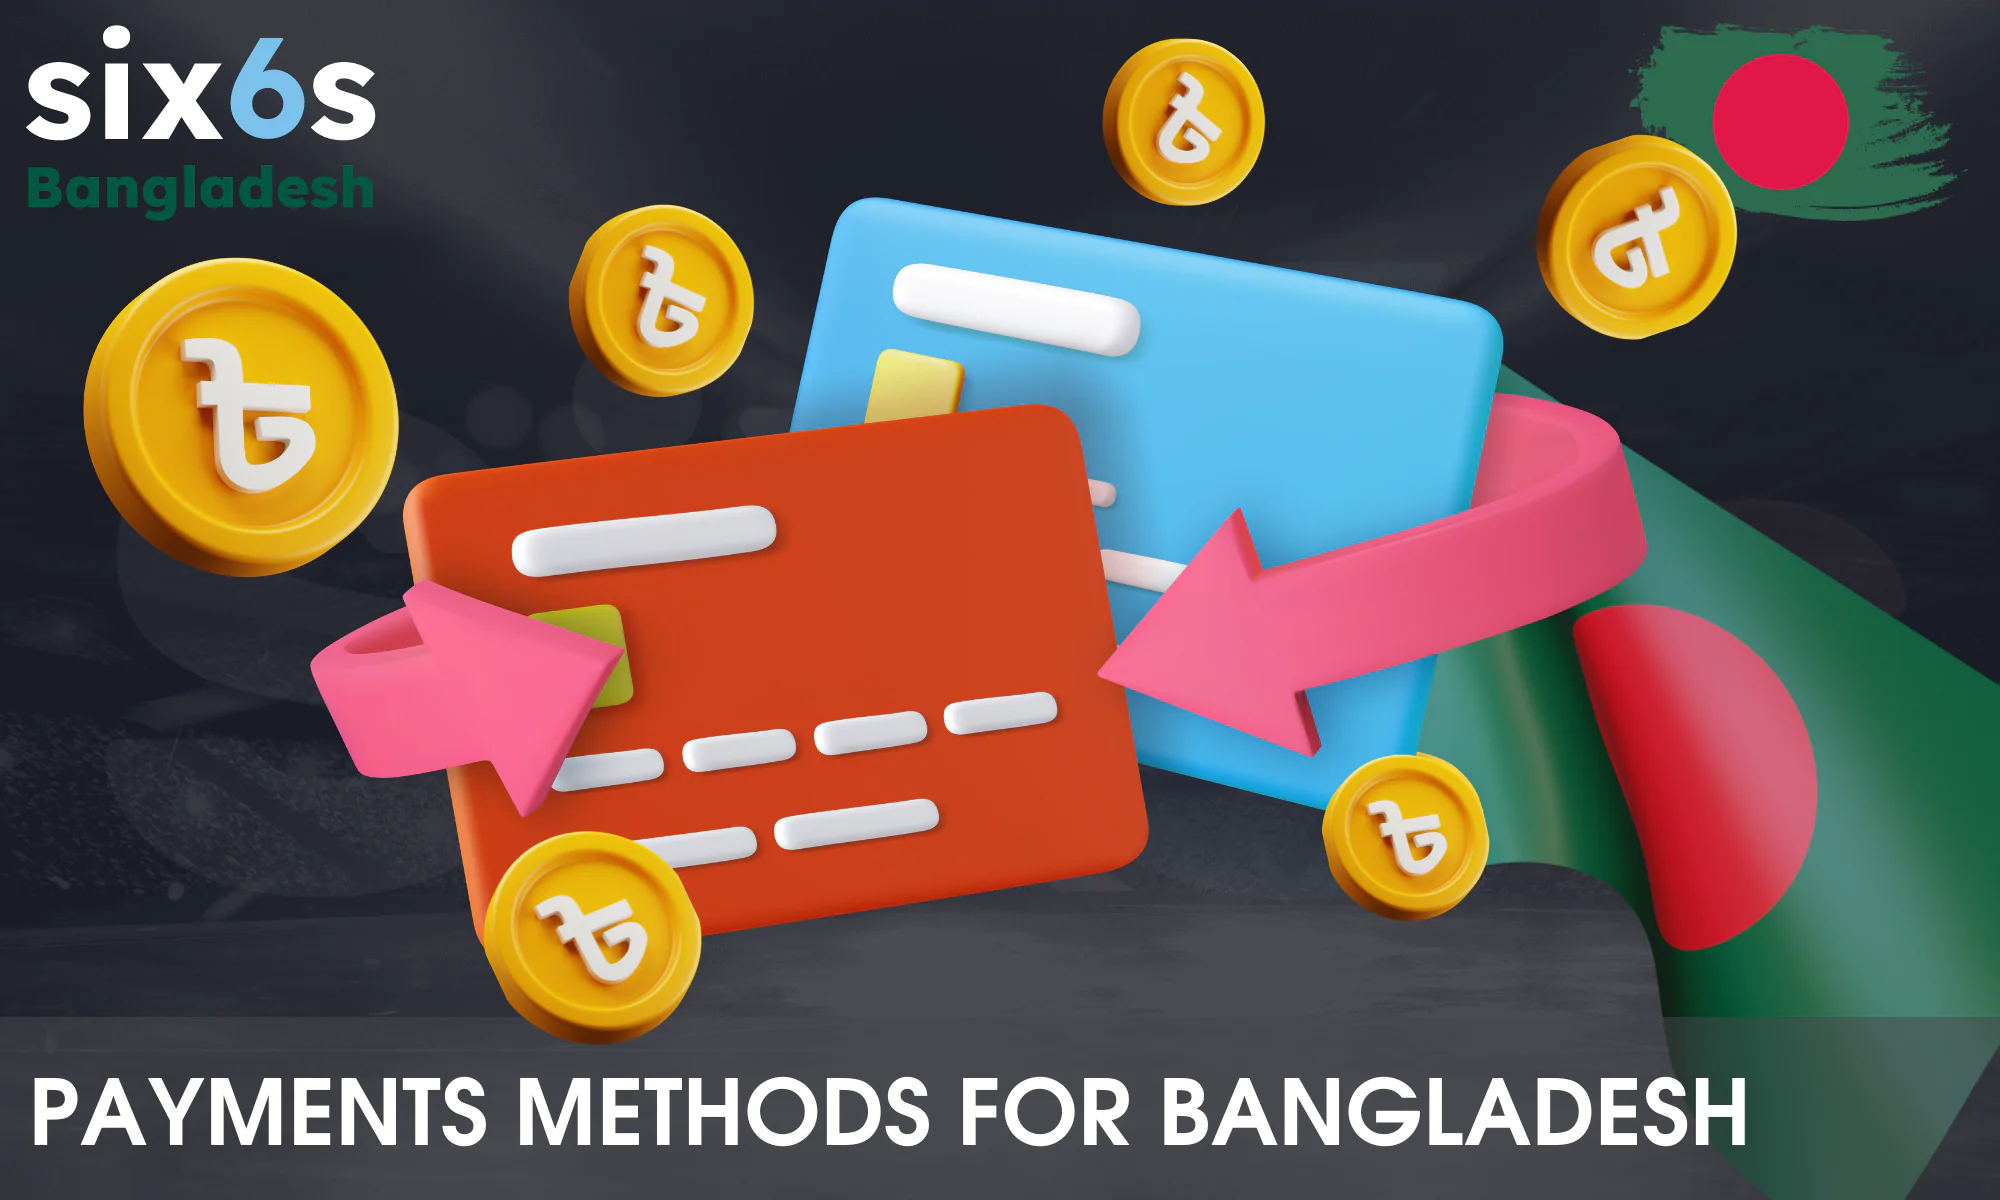 Features of depositing and withdrawing funds in Six6s for Bangladeshi users